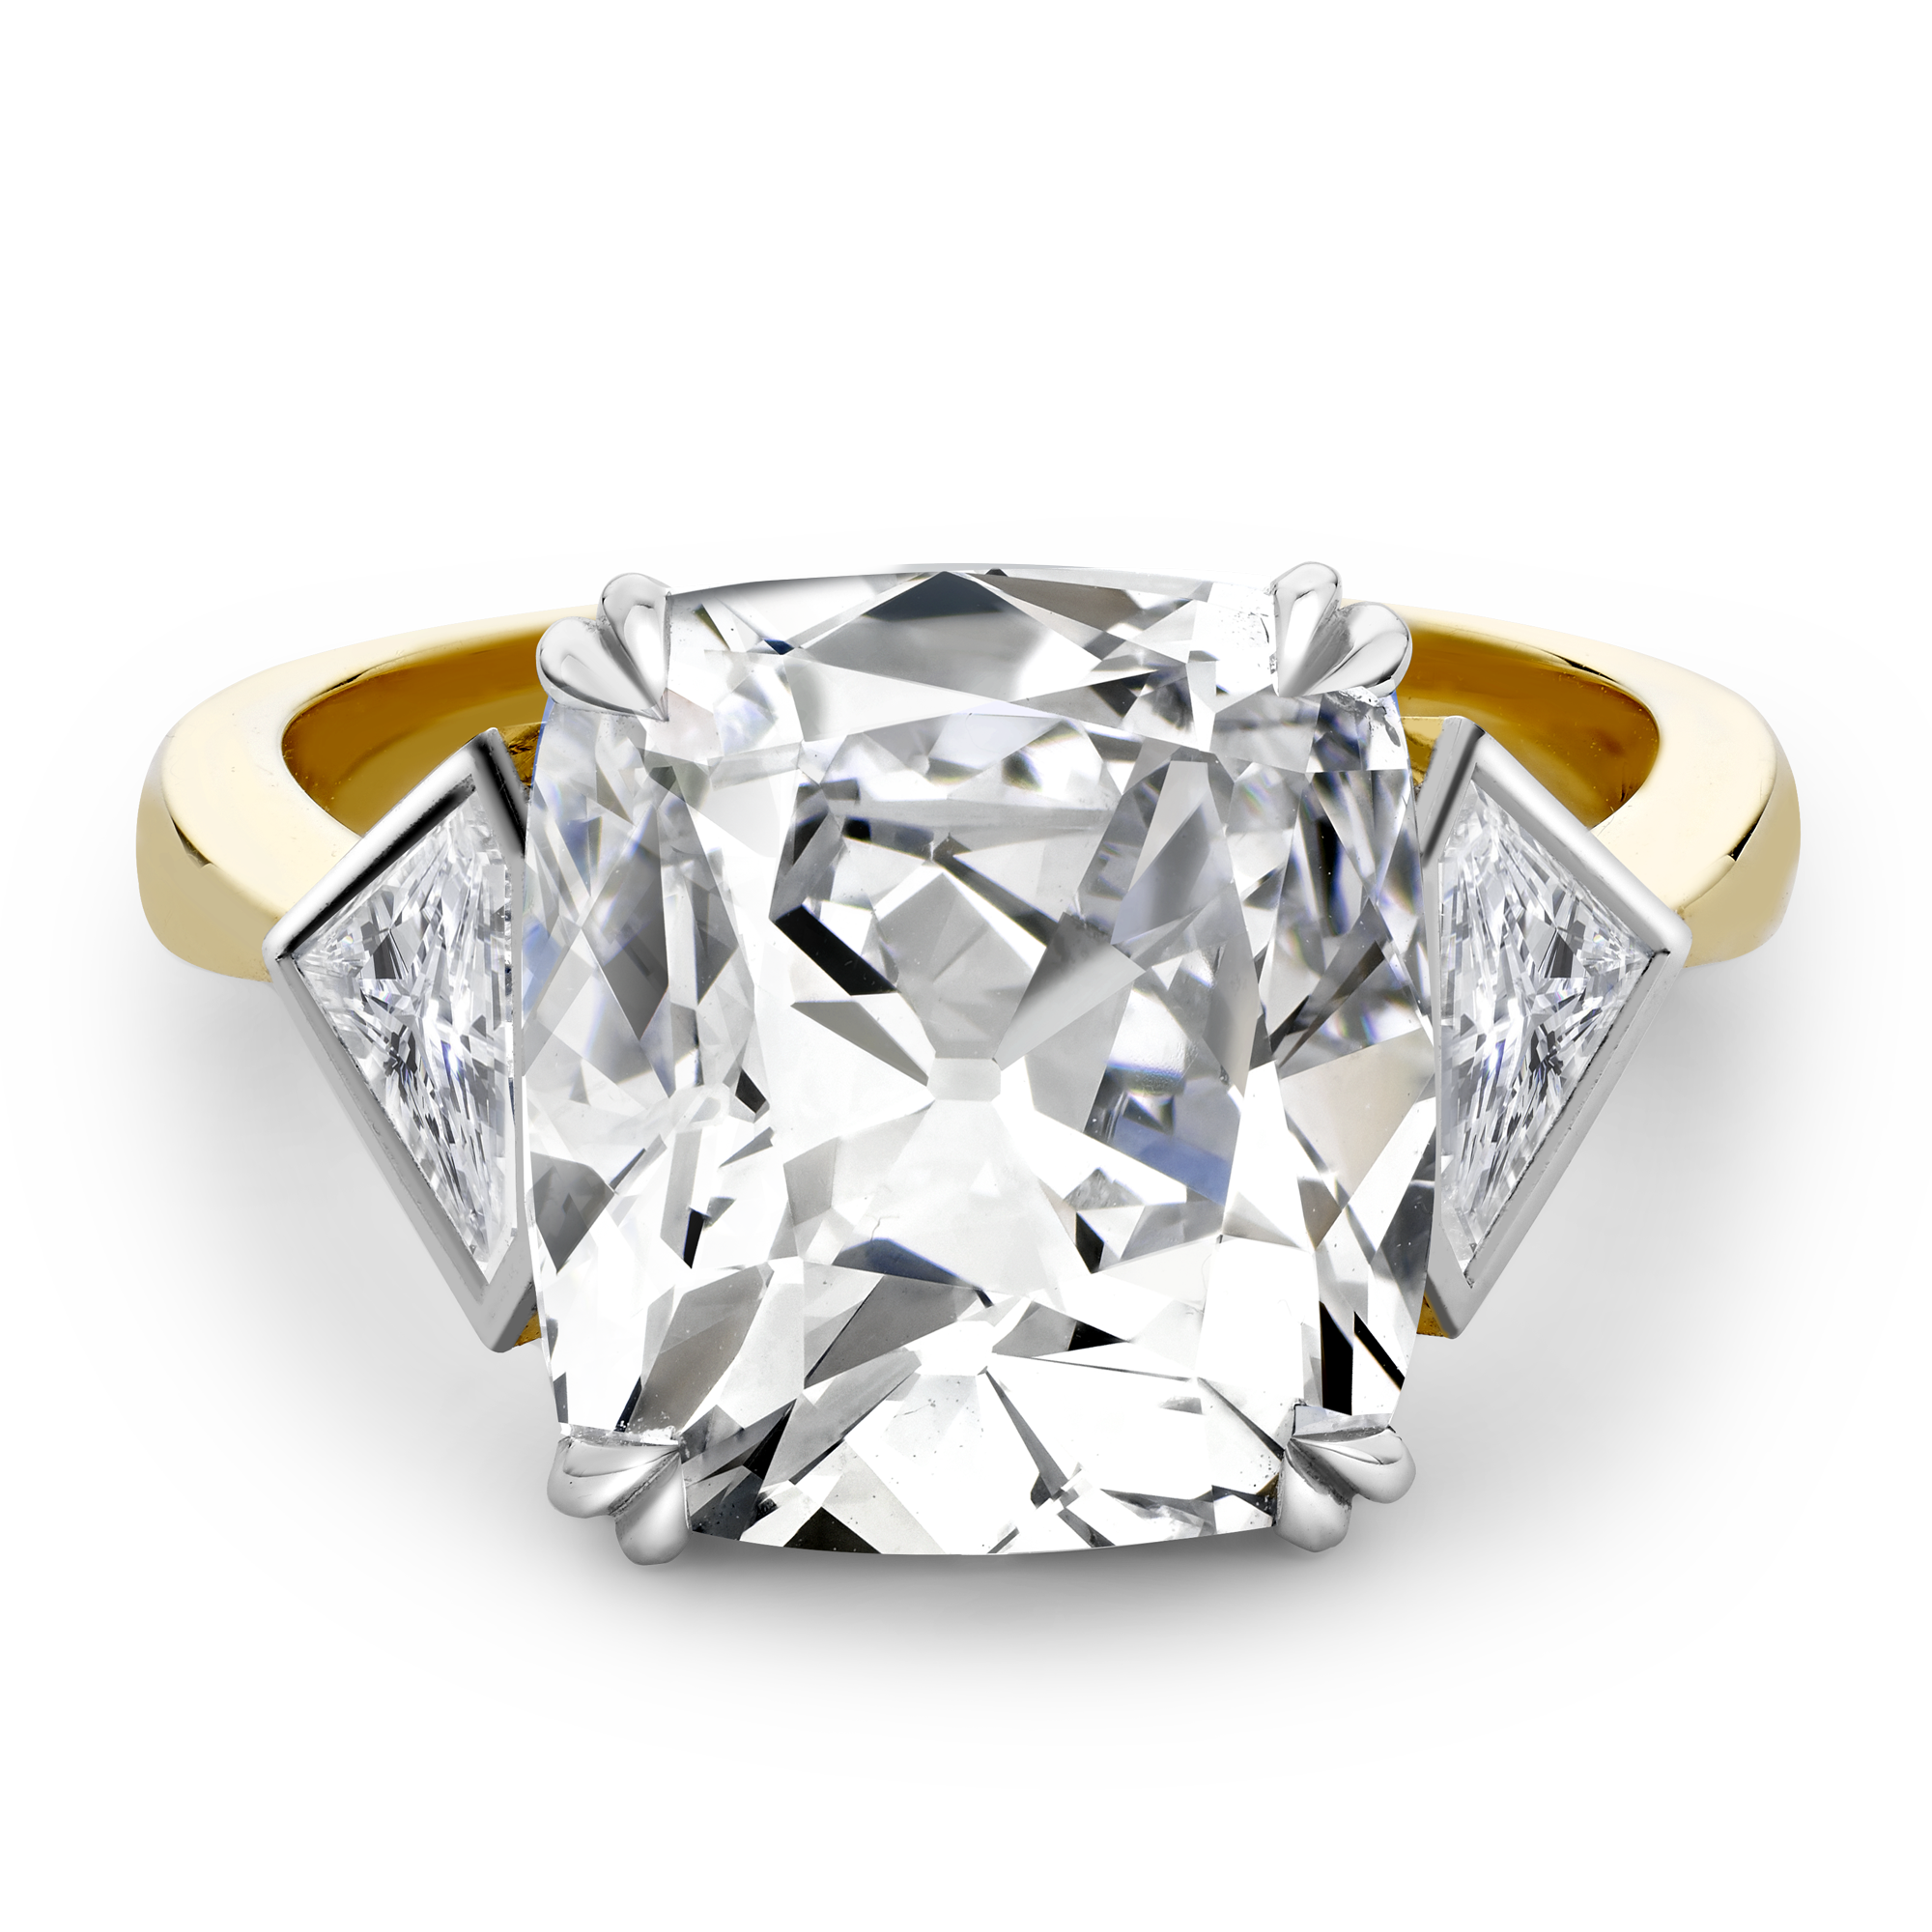 Masterpiece Silhouette Setting 6.98ct Diamond Solitaire Ring Cushion Antique Cut, Claw Set_2